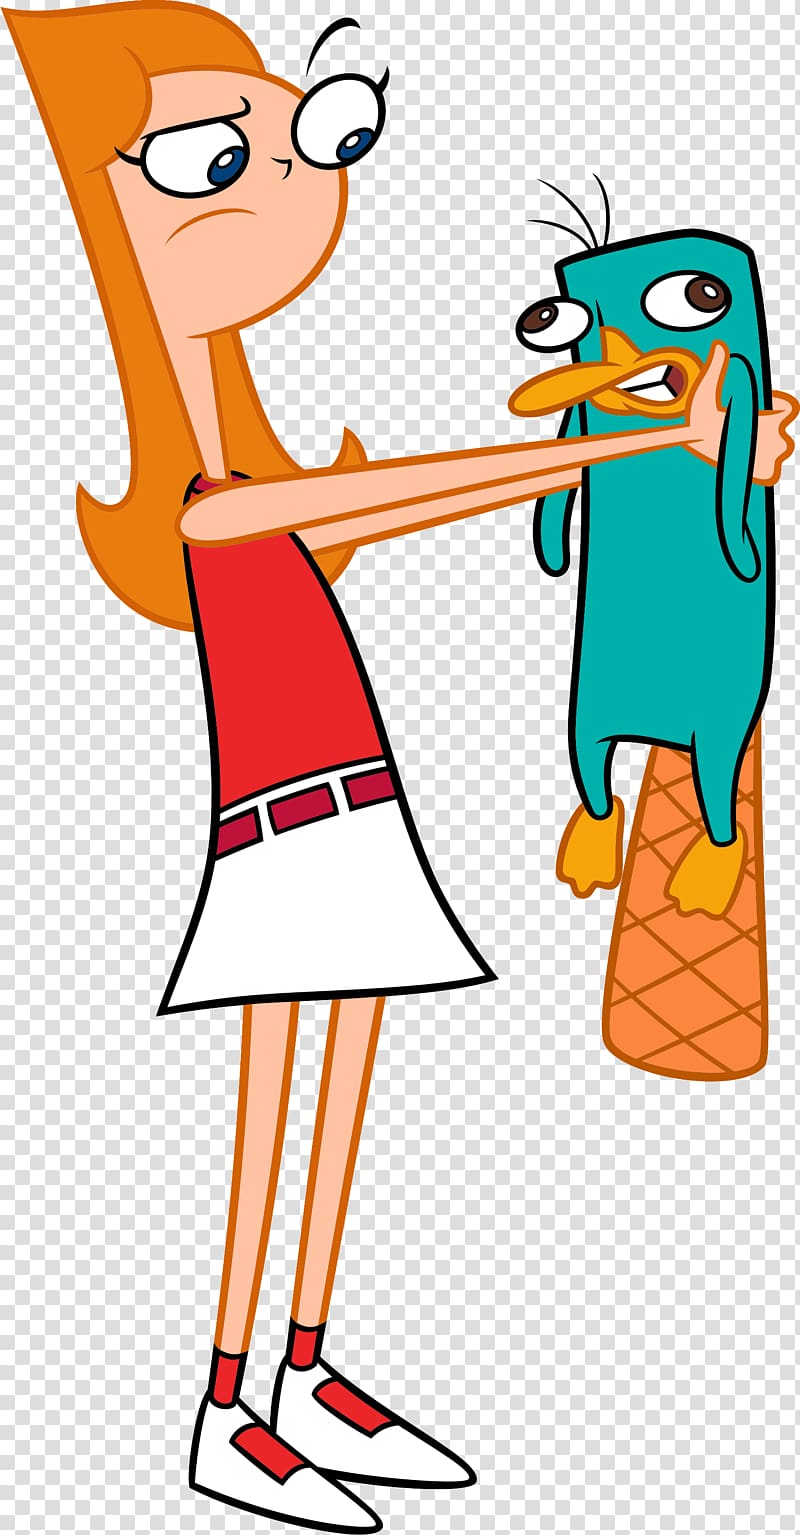 Candace Flynn Perry the Platypus Phineas Flynn Ferb Fletcher Isabella Garcia-Shapiro, candace flynn phineas and ferb transparent background PNG clipart